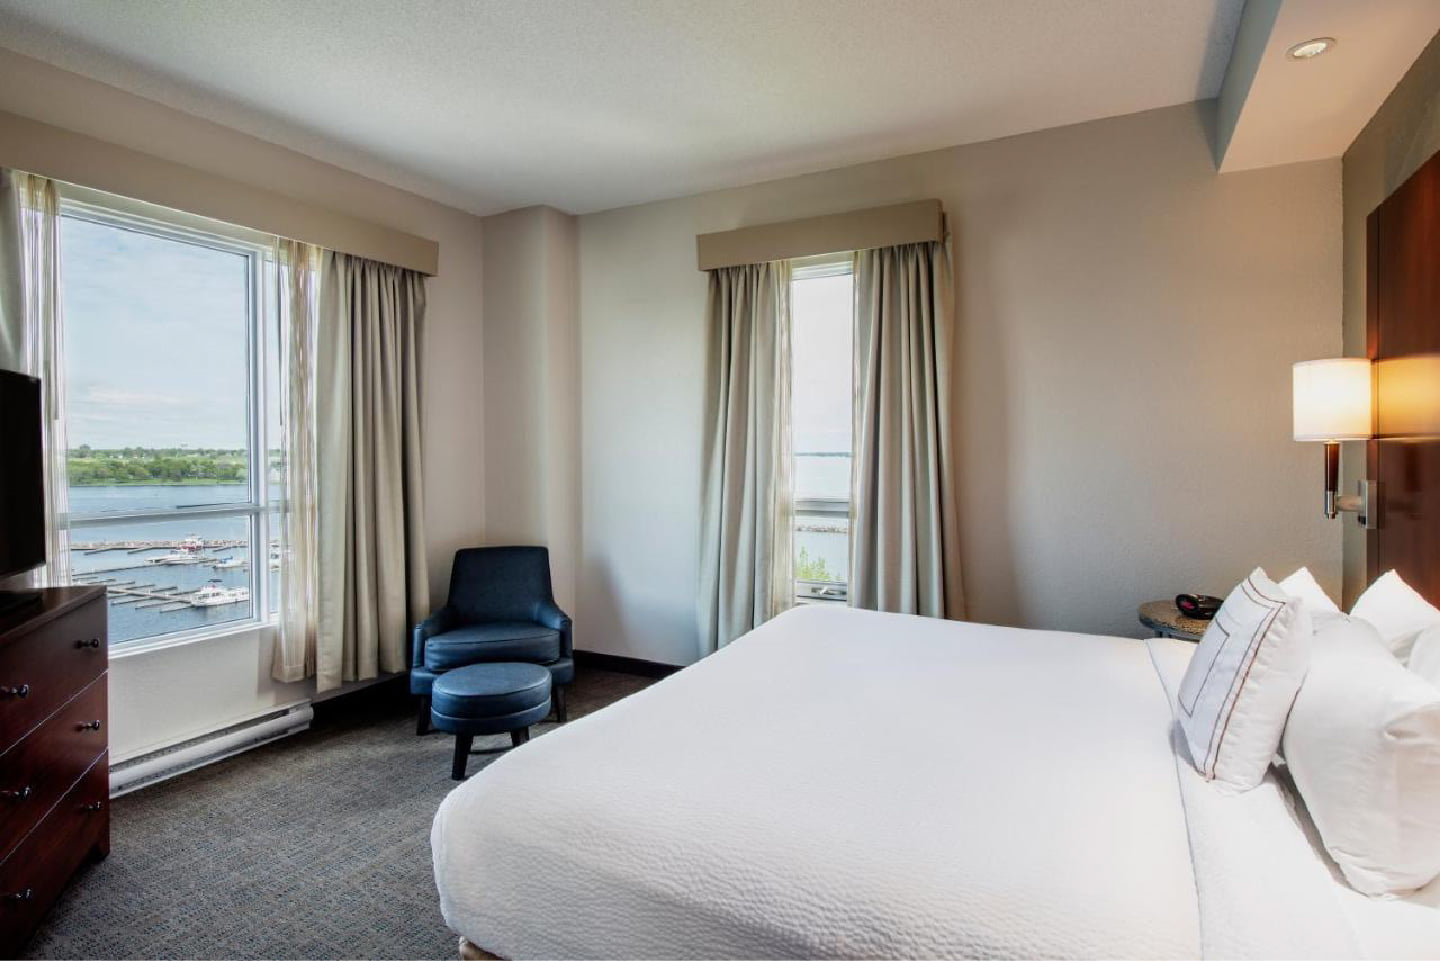 Example Room at the pet-friendly Residence inn by Marriott Kingston Waters Edge